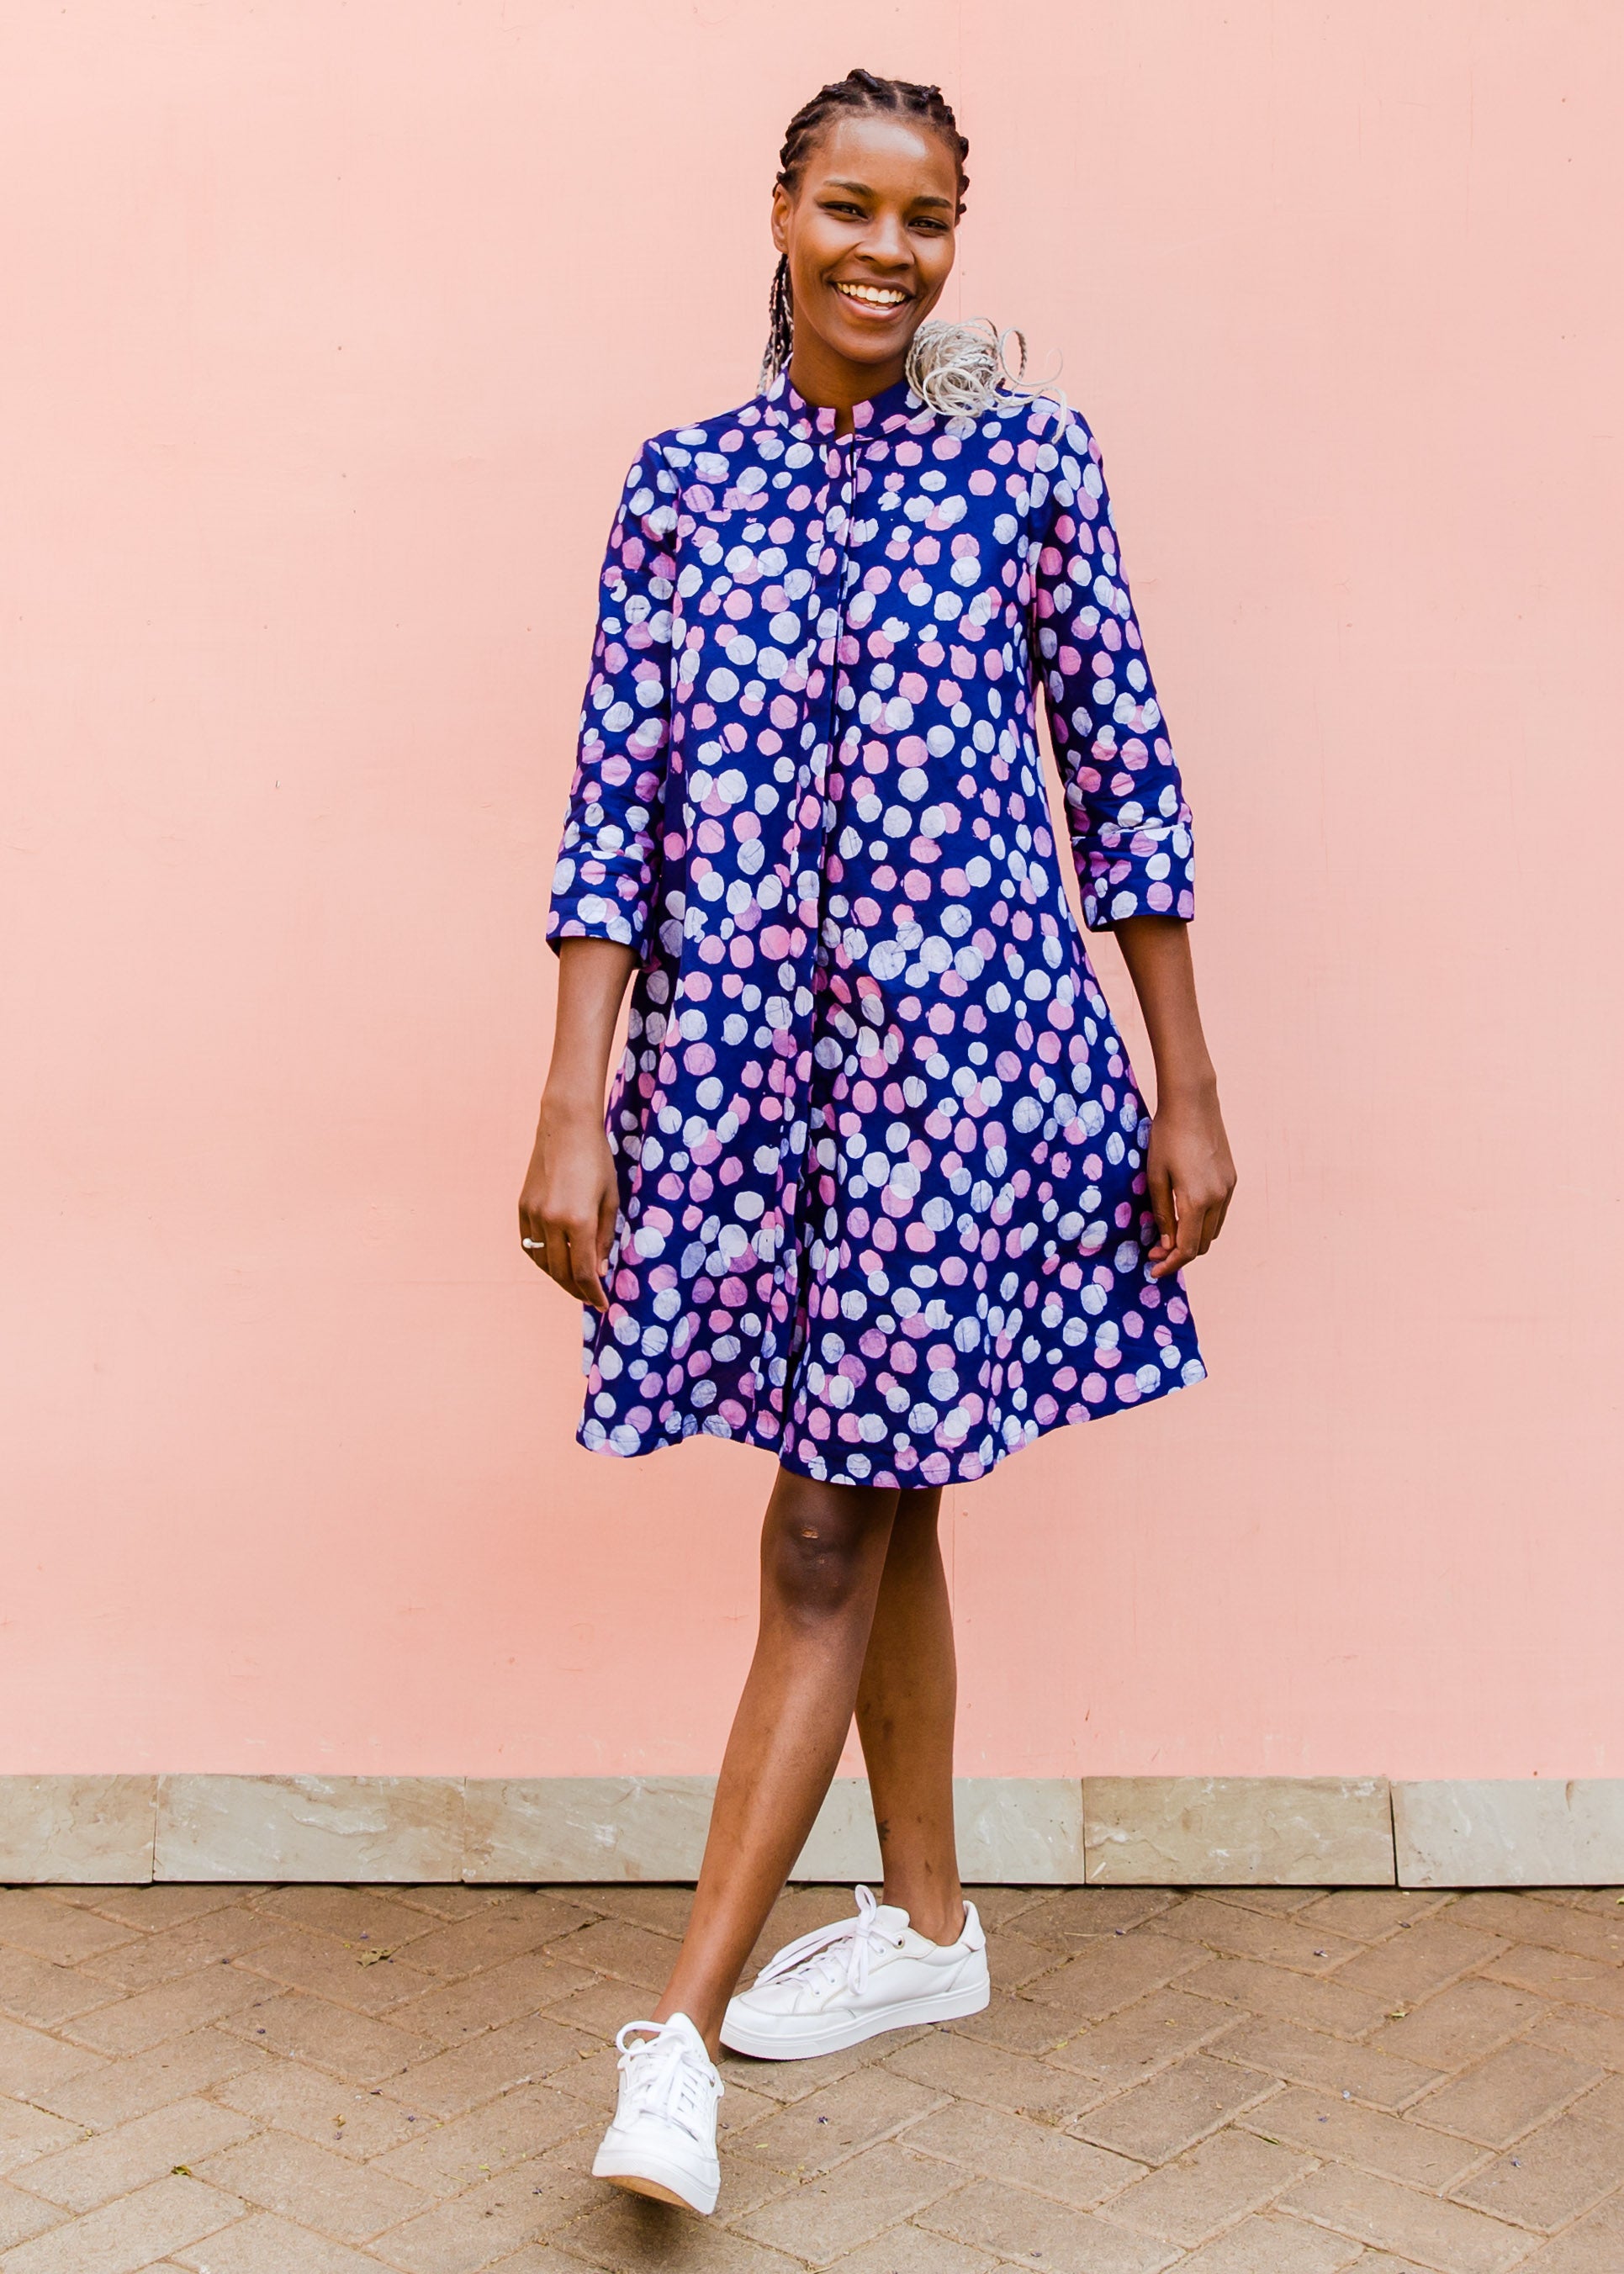 Model wearing purple dress with pink shaded polka dots.